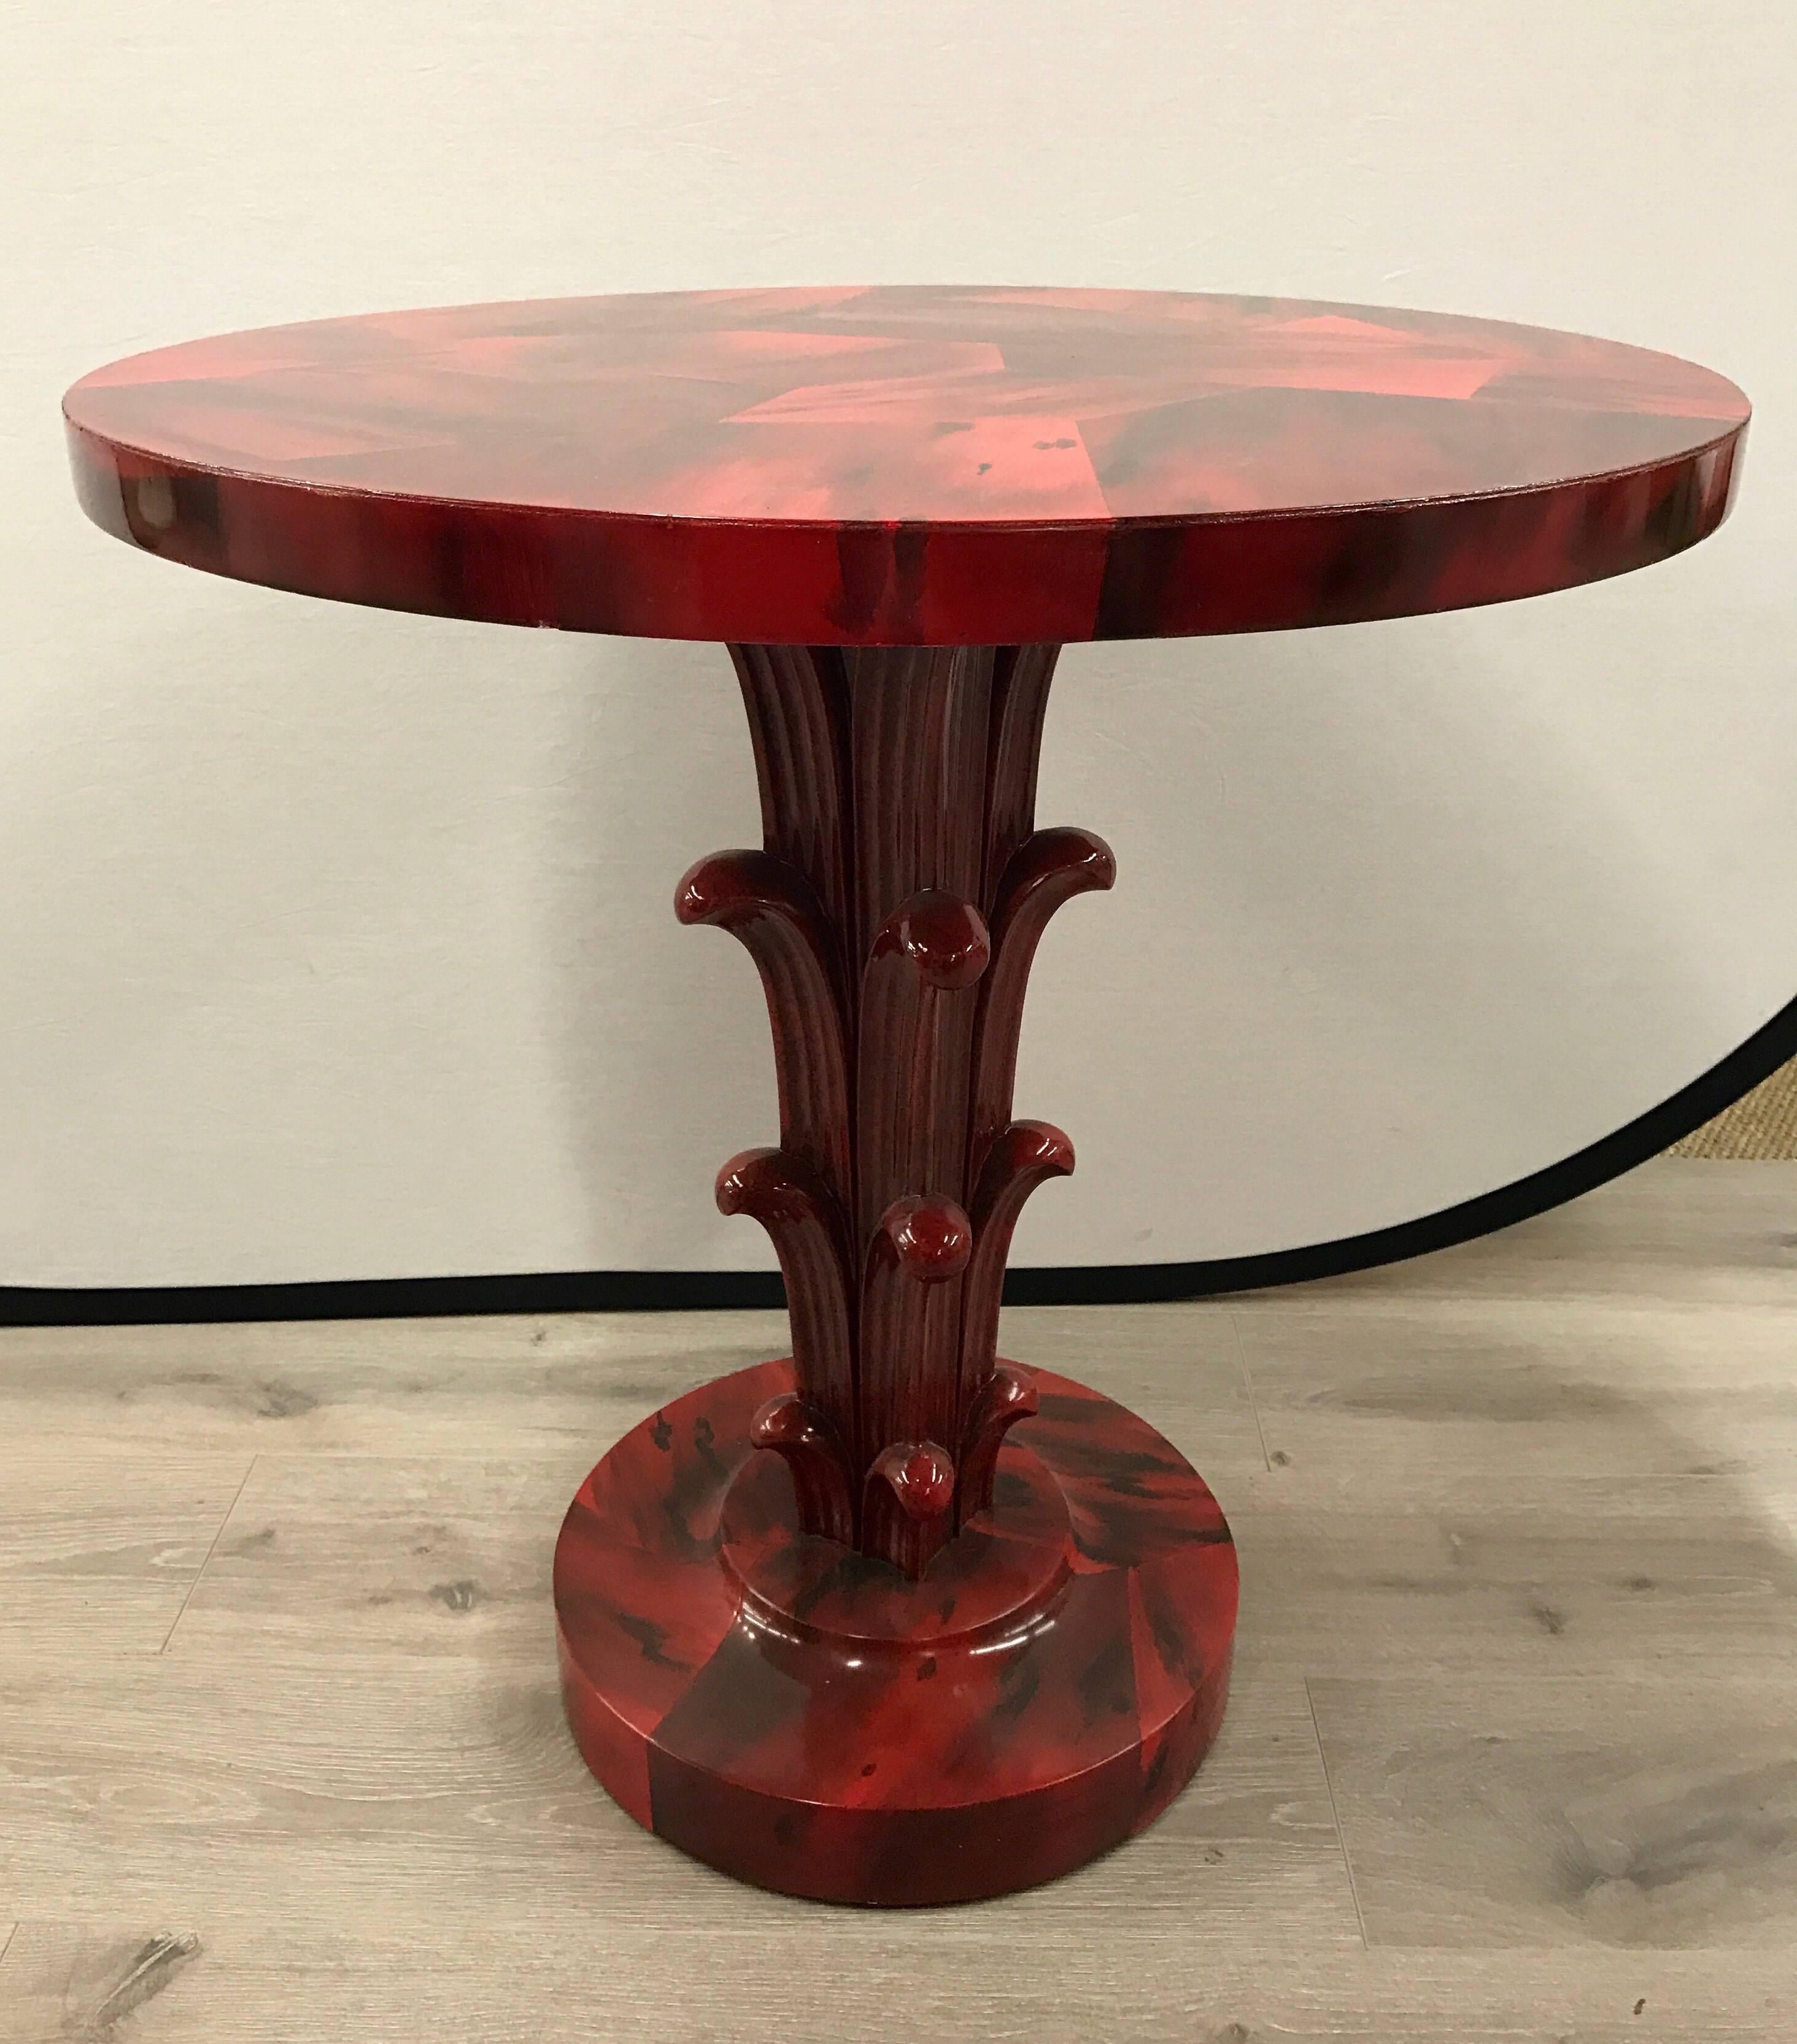 20th Century Serge Roche Style Art Deco Red Laquer Palm Tree Tables